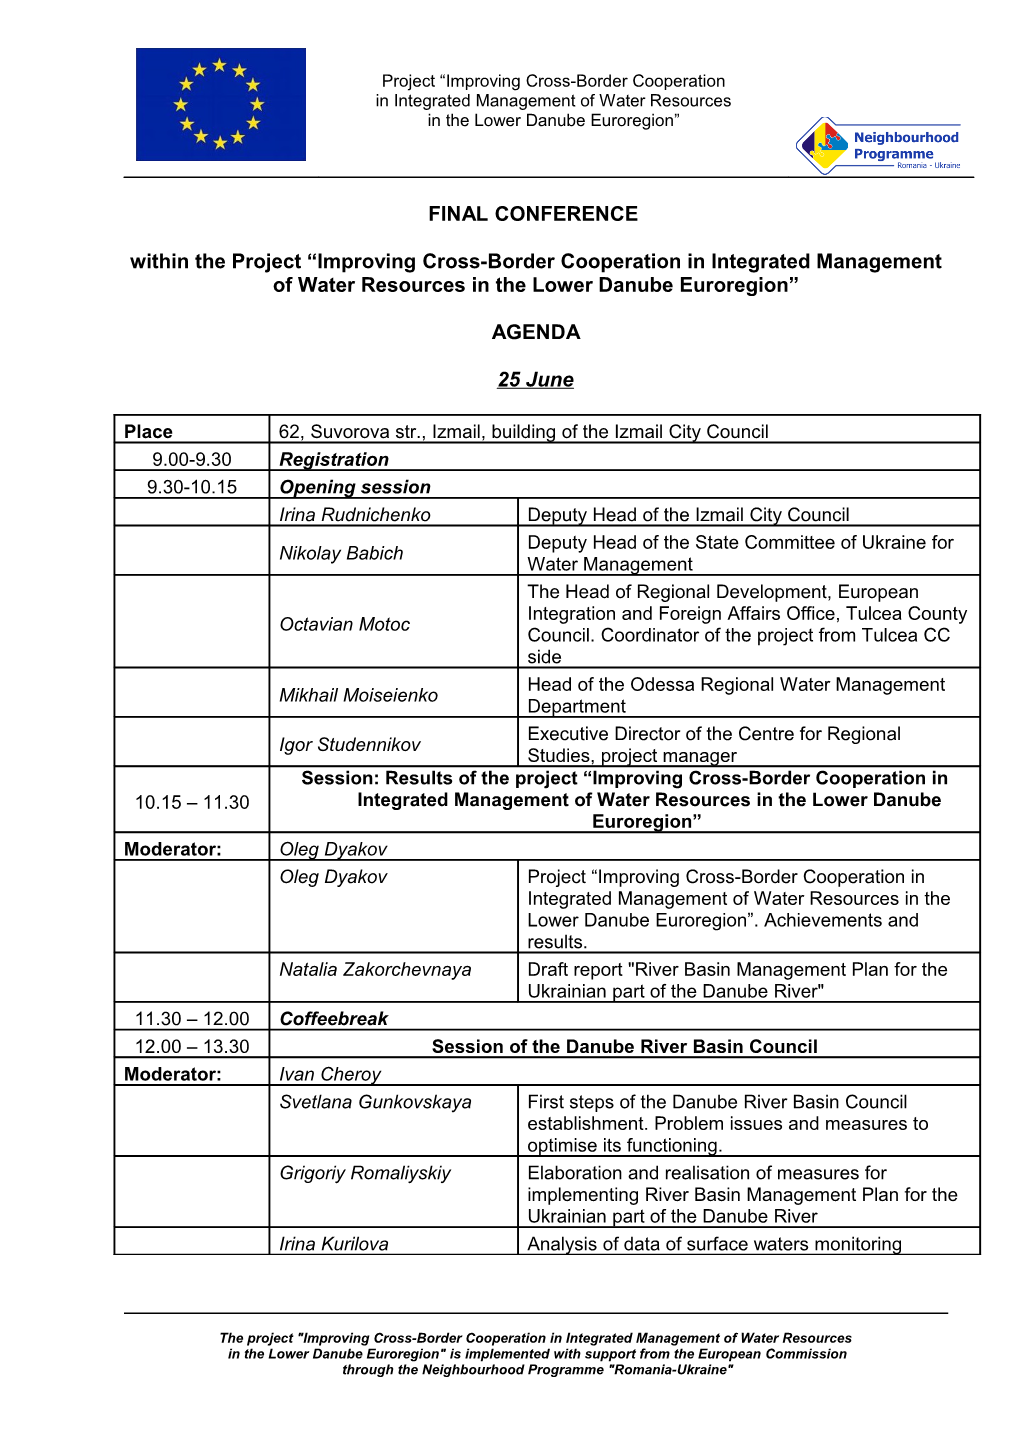 Agenda for Final Conference